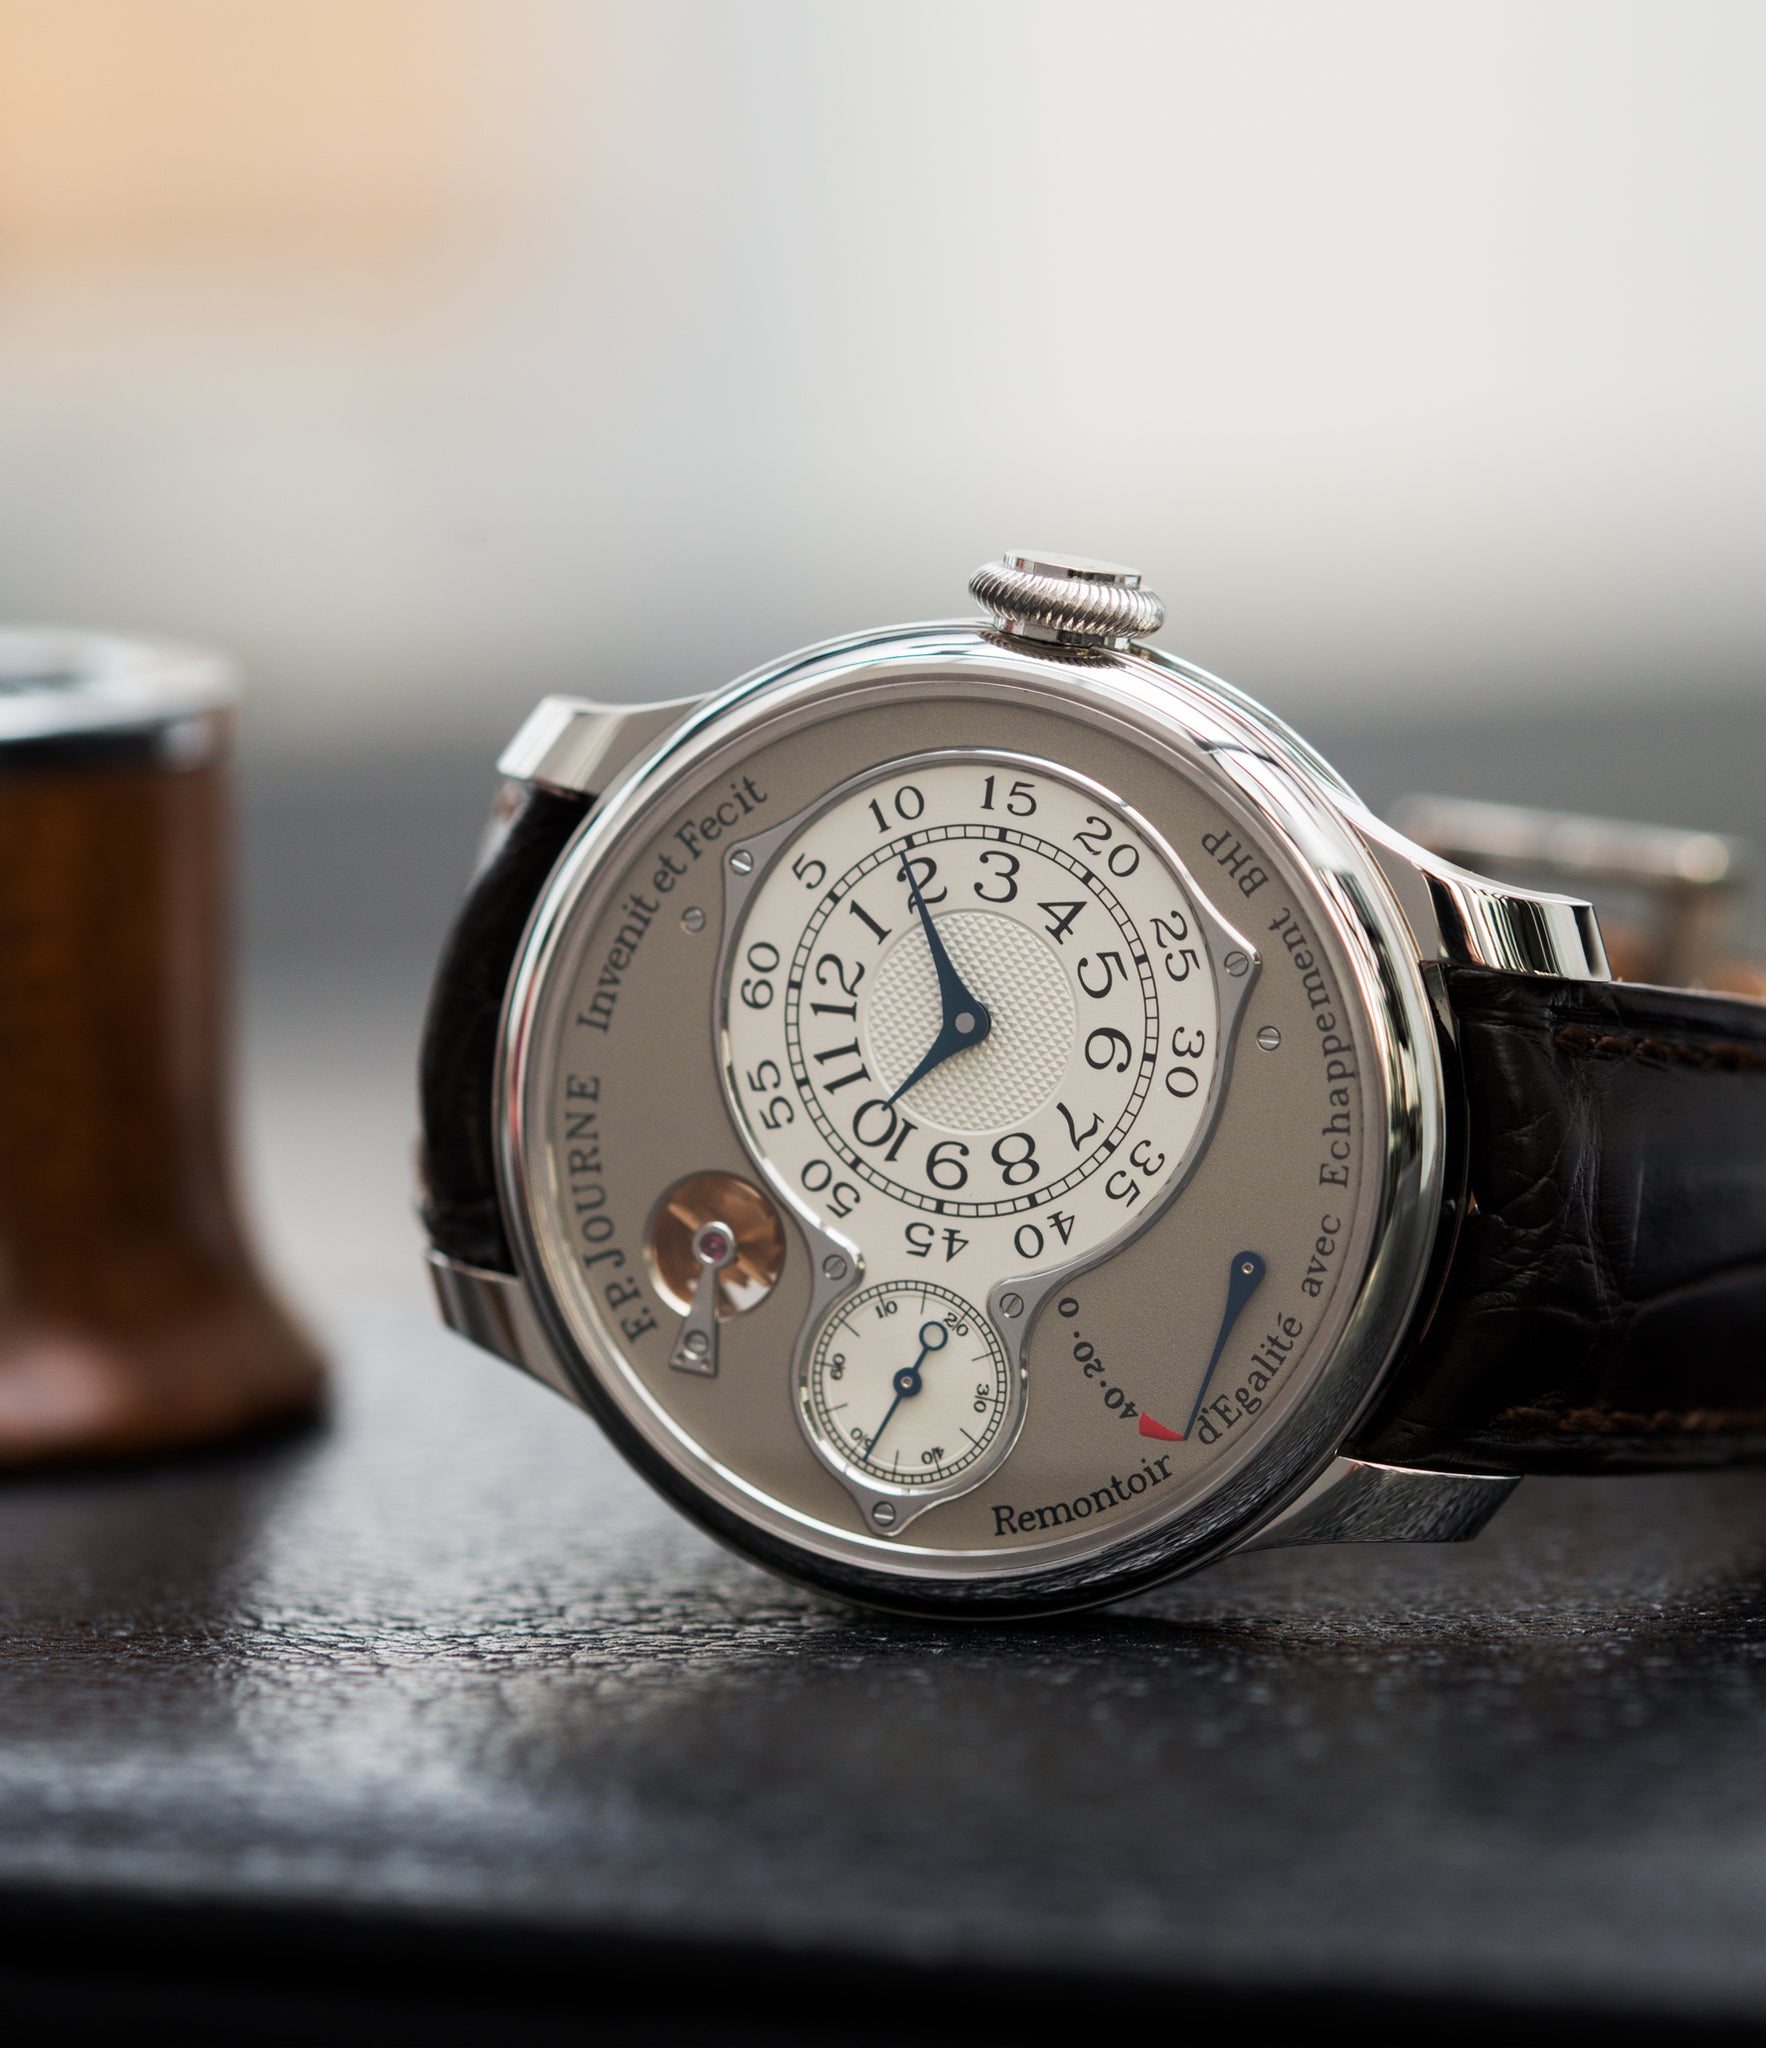 platinum preowned F. P. Journe Chronometre Optimum platinum rare watch for sale online at A Collected Man London approved retailer of independent watchmakers